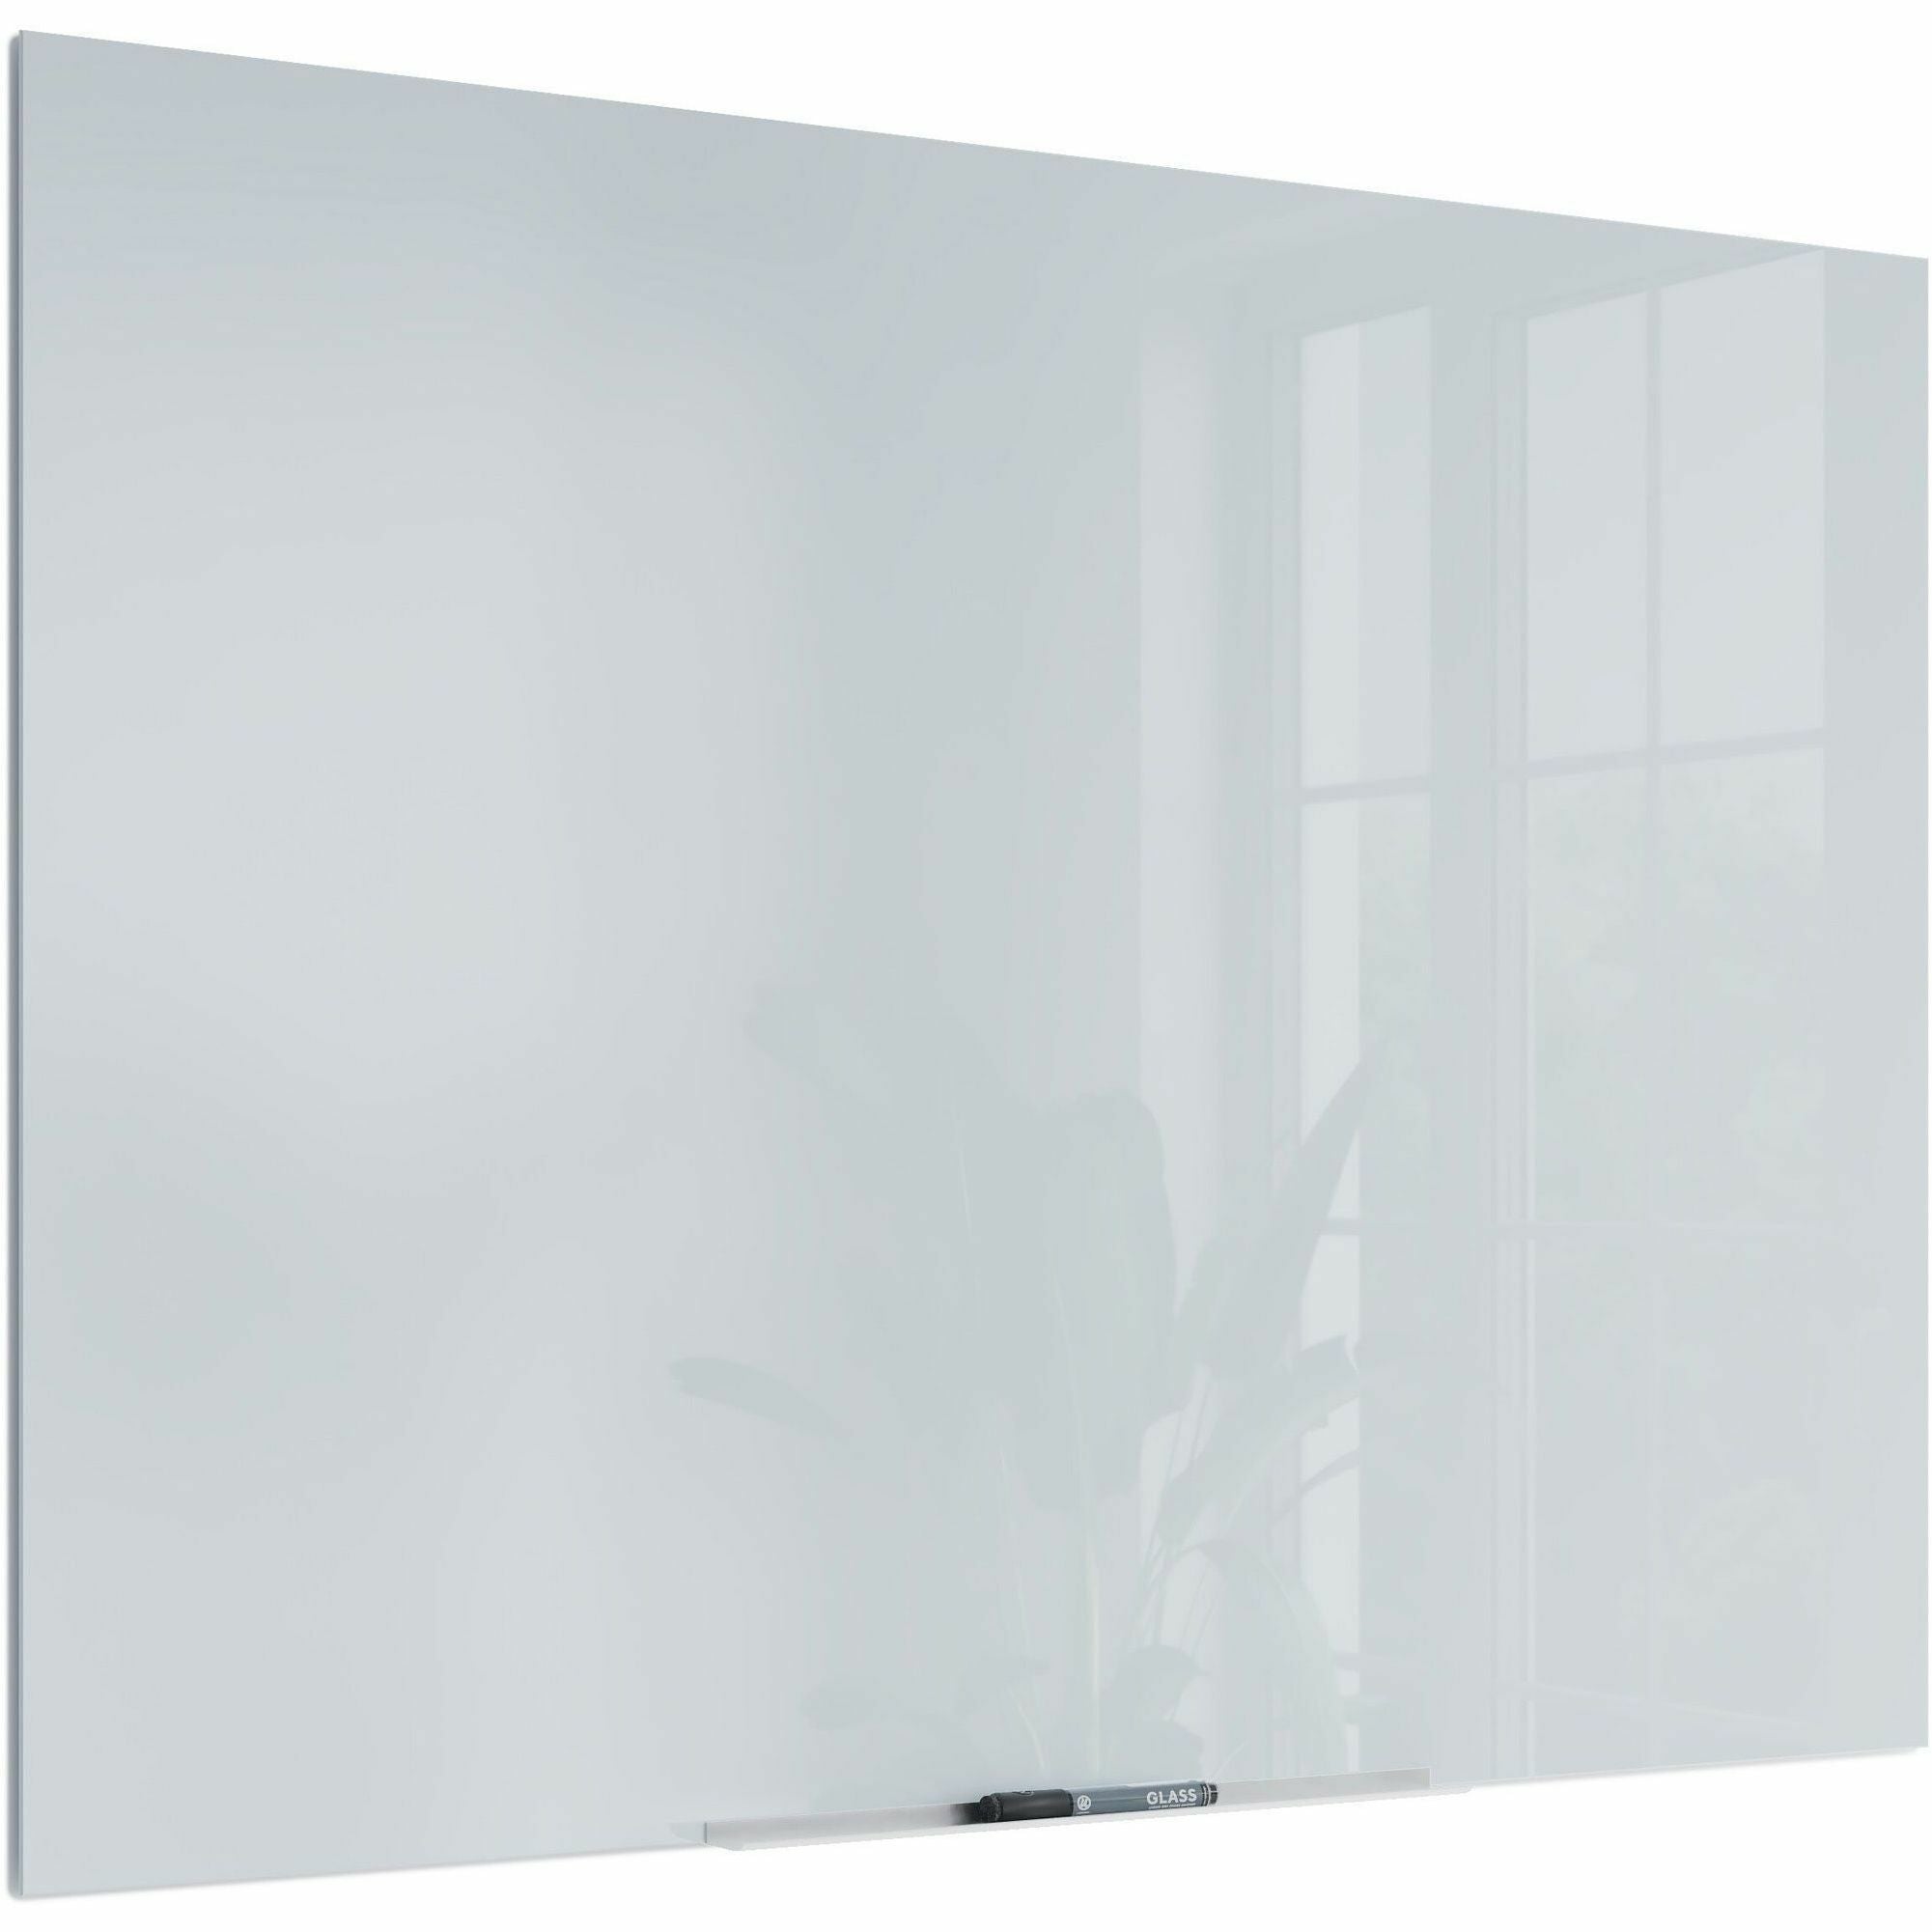 u-brands-floating-glass-dry-erase-board-35-29-ft-width-x-47-39-ft-height-frosted-white-tempered-glass-surface-rectangle-horizontal-vertical-1-each_ubr2778u0001 - 2